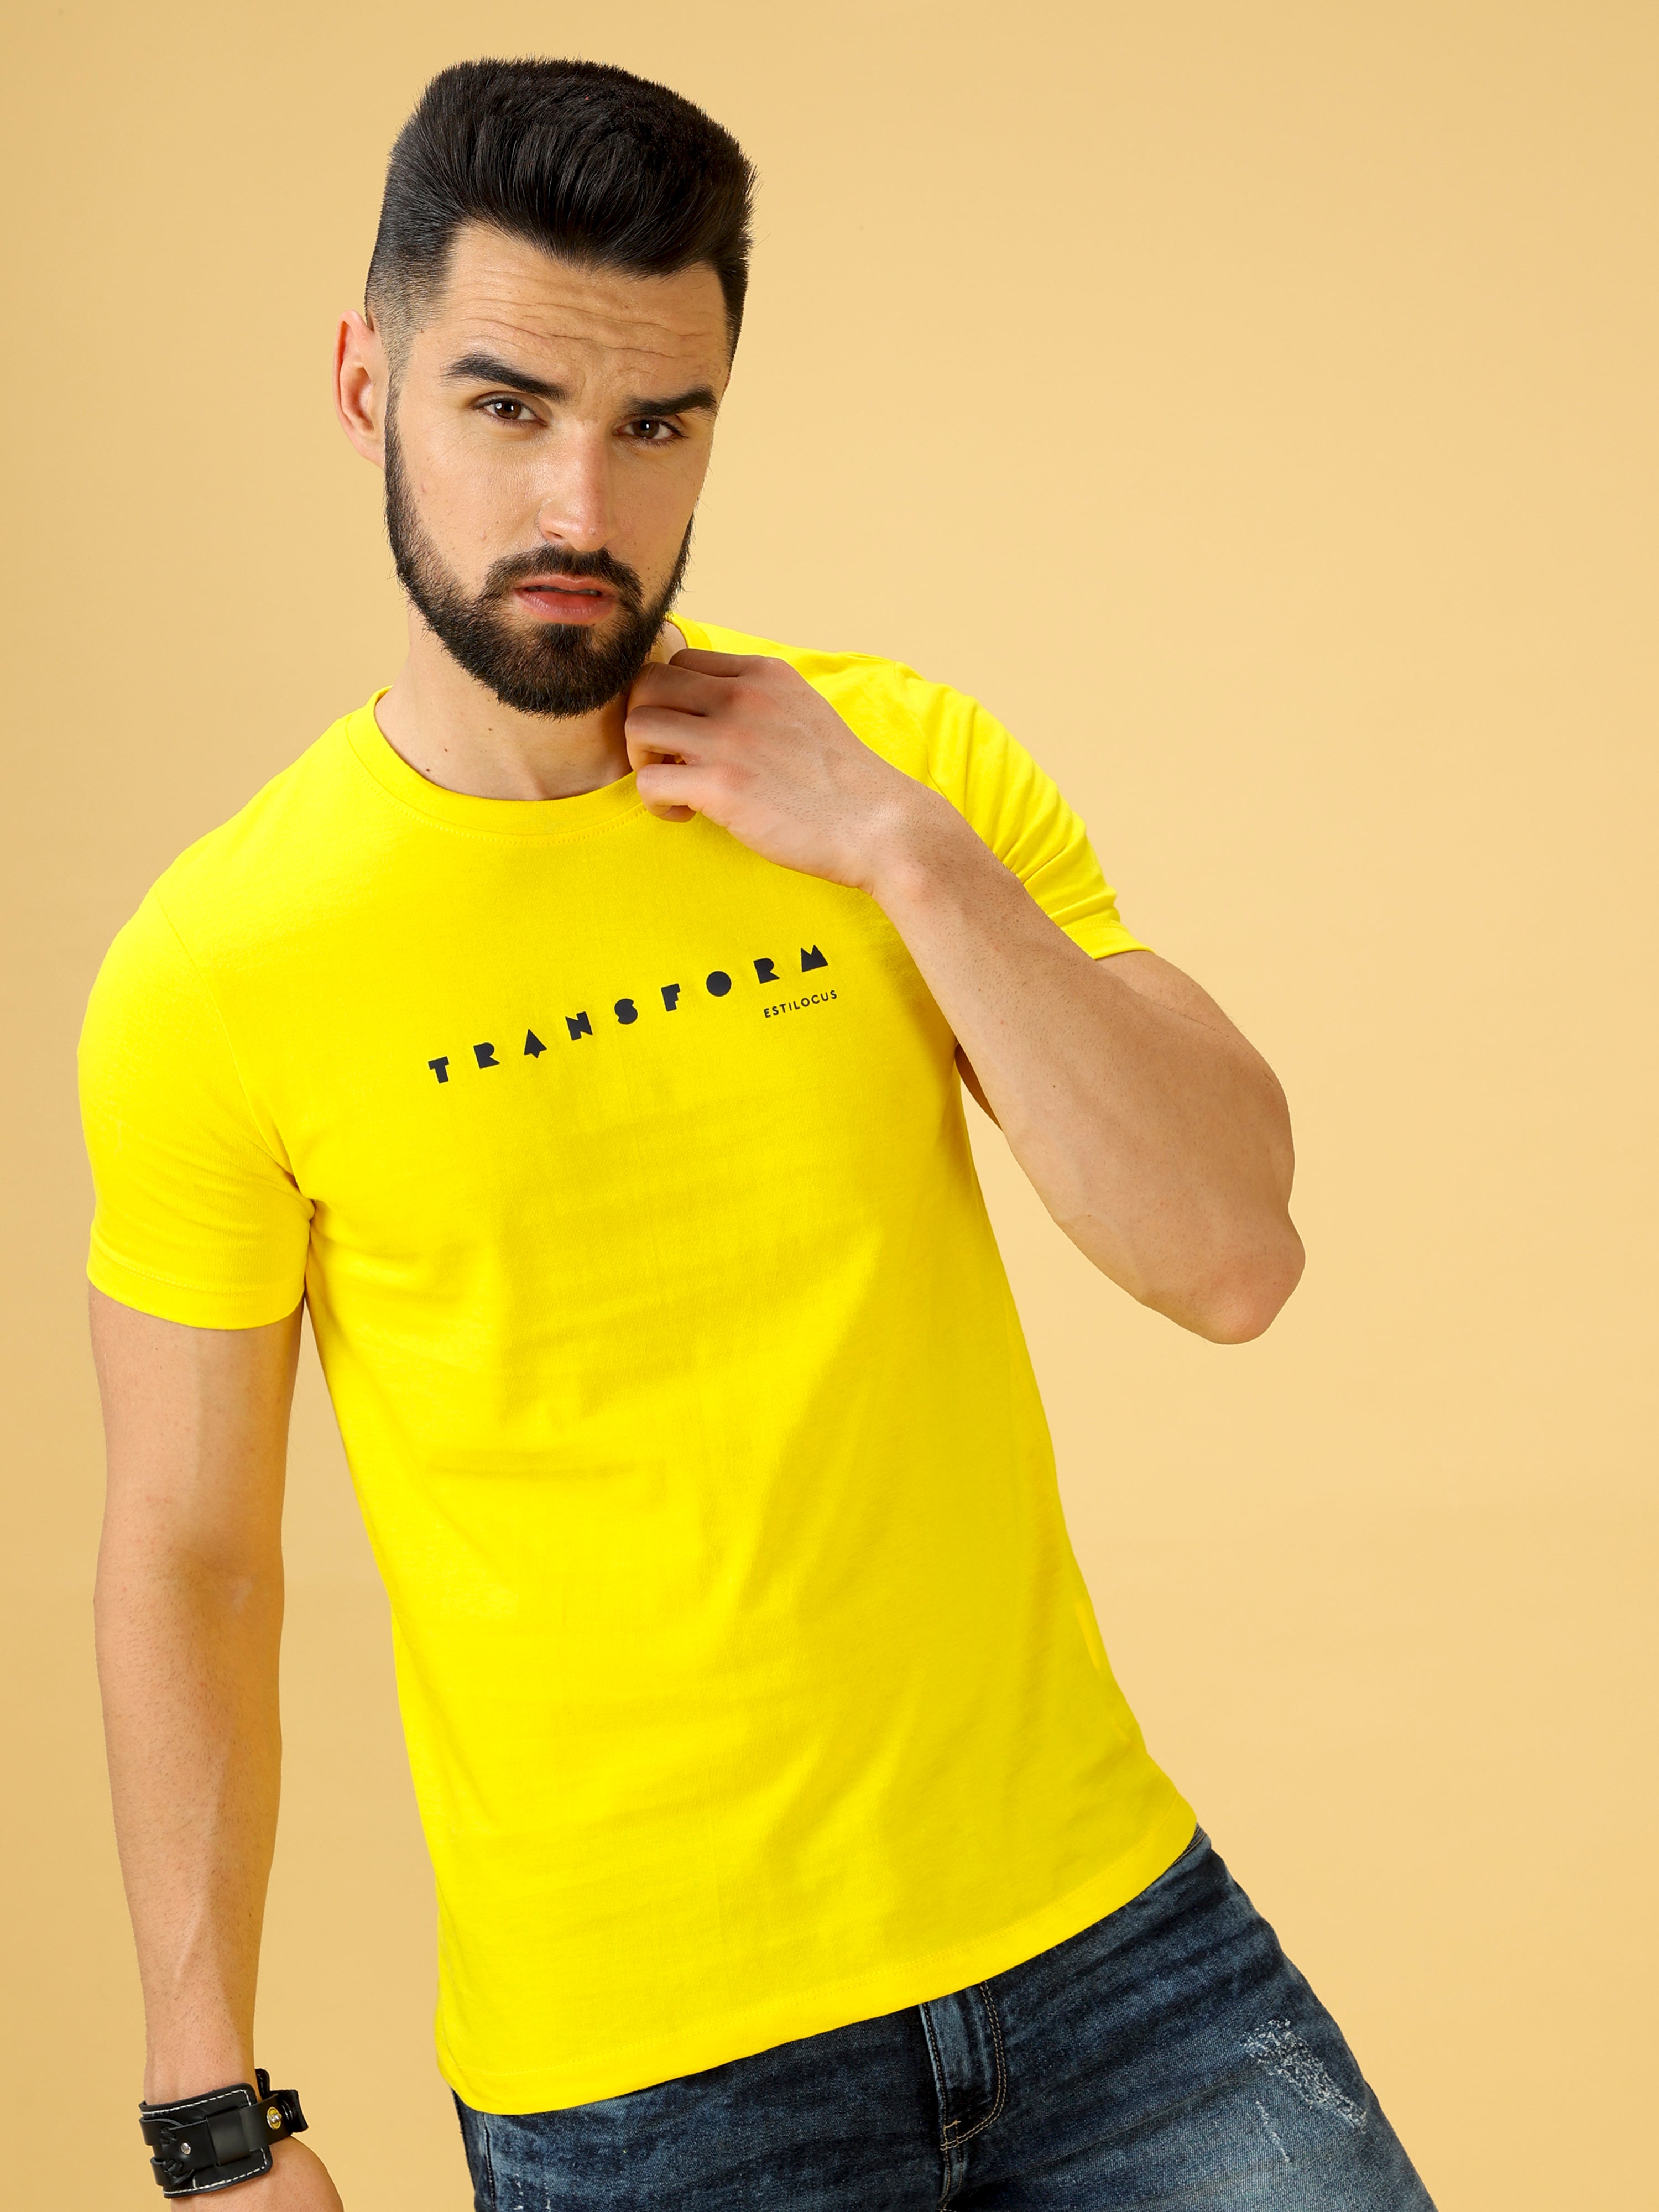 Transform Navy Print Crew Neck T-Shirt shop online at Estilocus. This pure cotton printed T-shirt is a stylish go-to for laidback days. Cut in a comfy regular fit. • 100% Cotton knitted interlock 190GSM• Bio washed fabric• Round neck T-shirt • Half sleeve